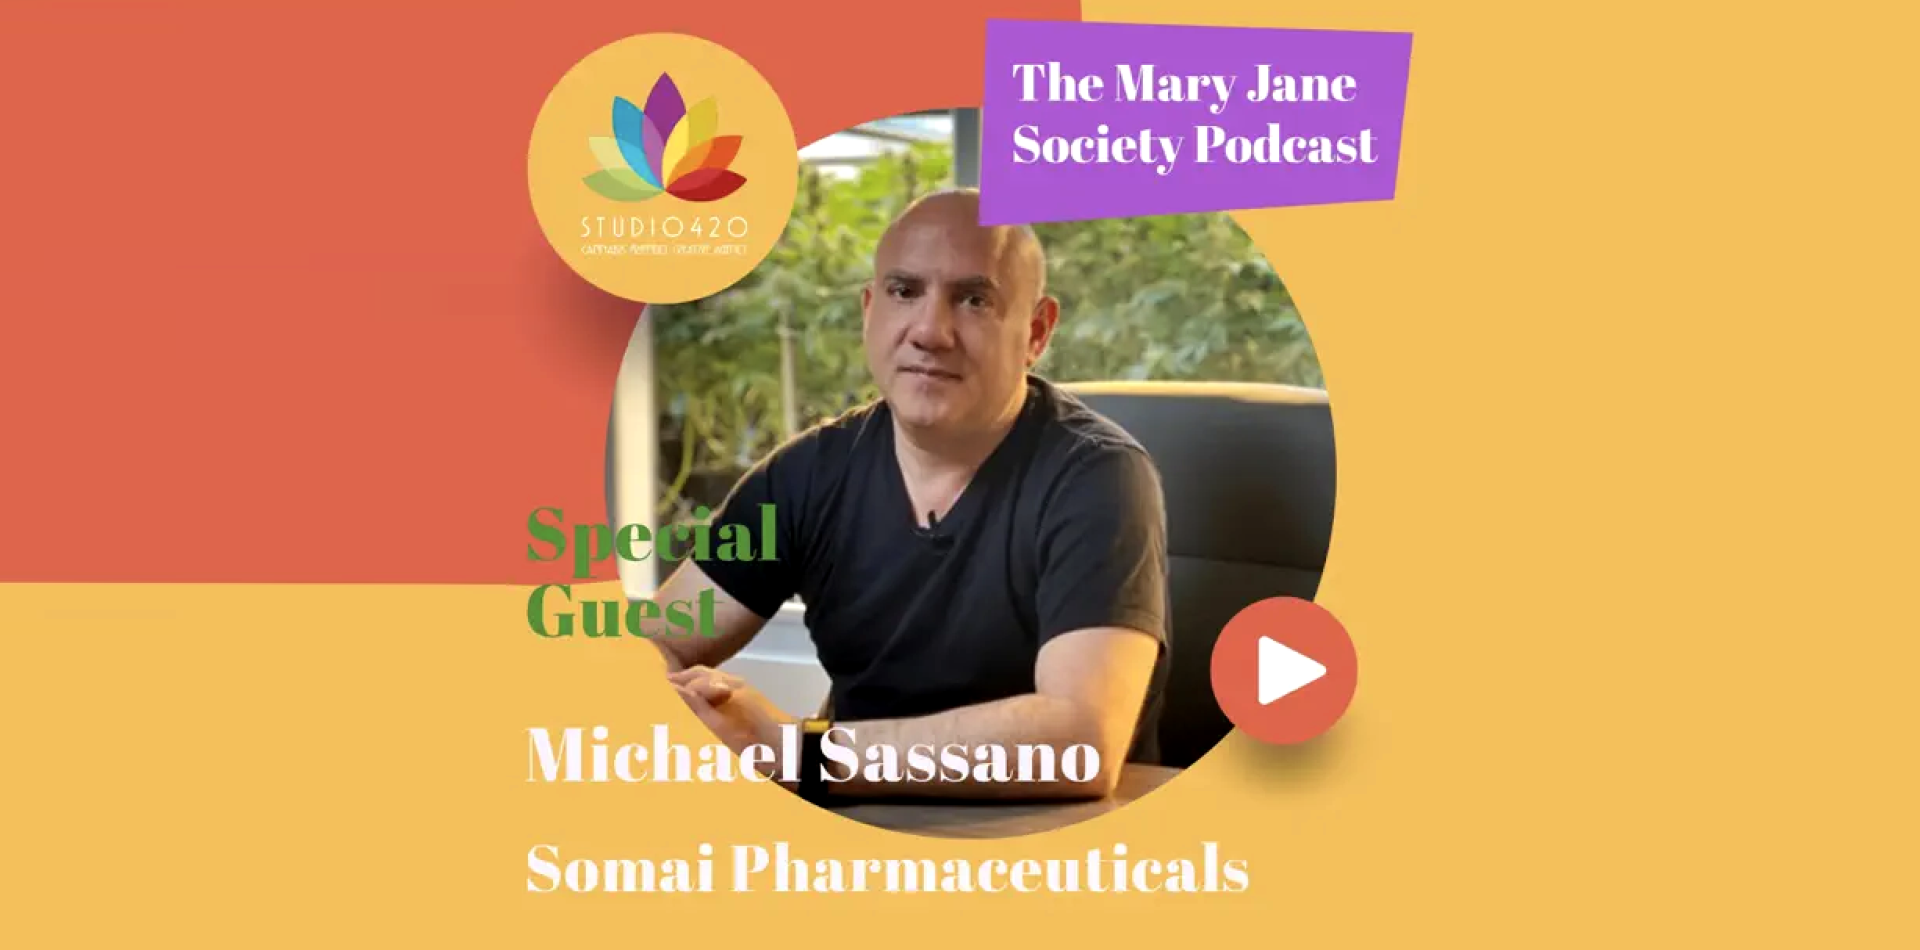 The Mary Jane Society Podcast &#8211; Watch Out. Europe Is Gaining Ground Over The U.S. In Cannabis Medicine